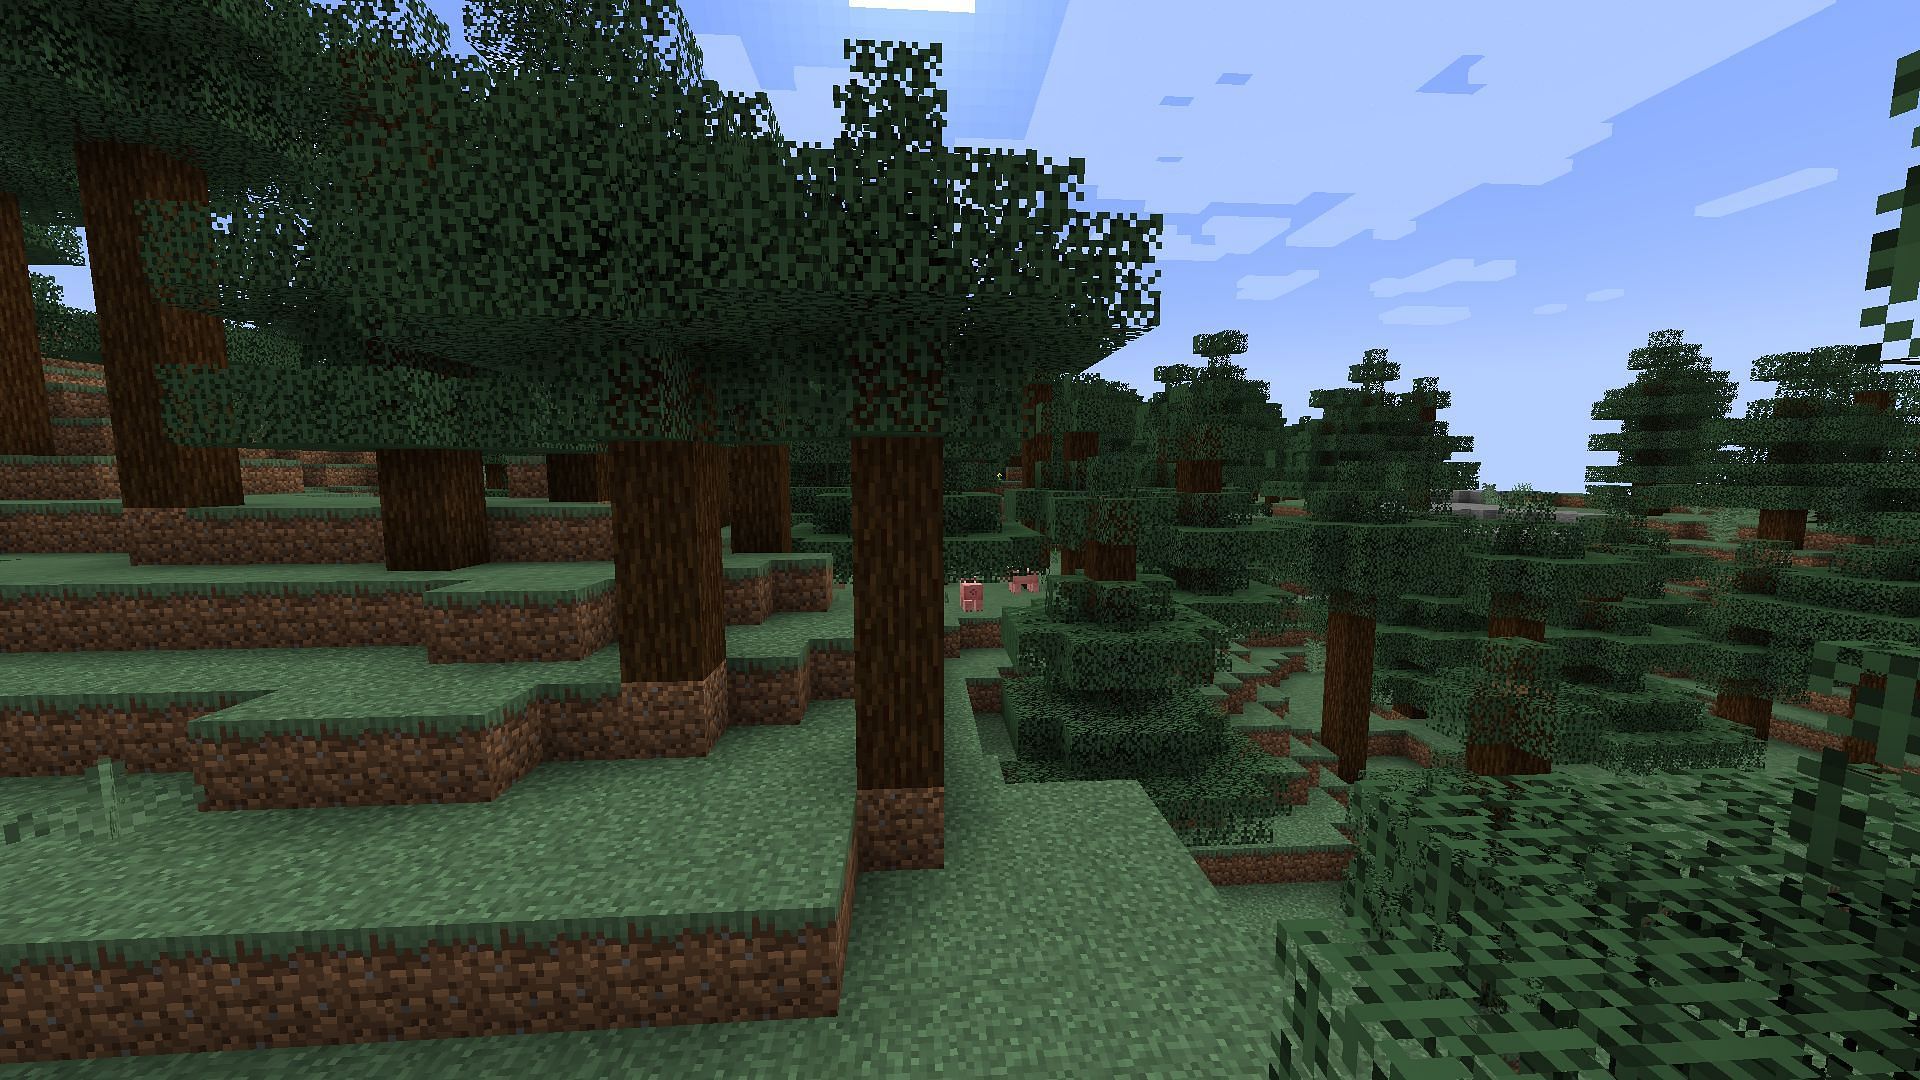 Wood logs can be obtained by punching a tree in the game (Image via Mojang)